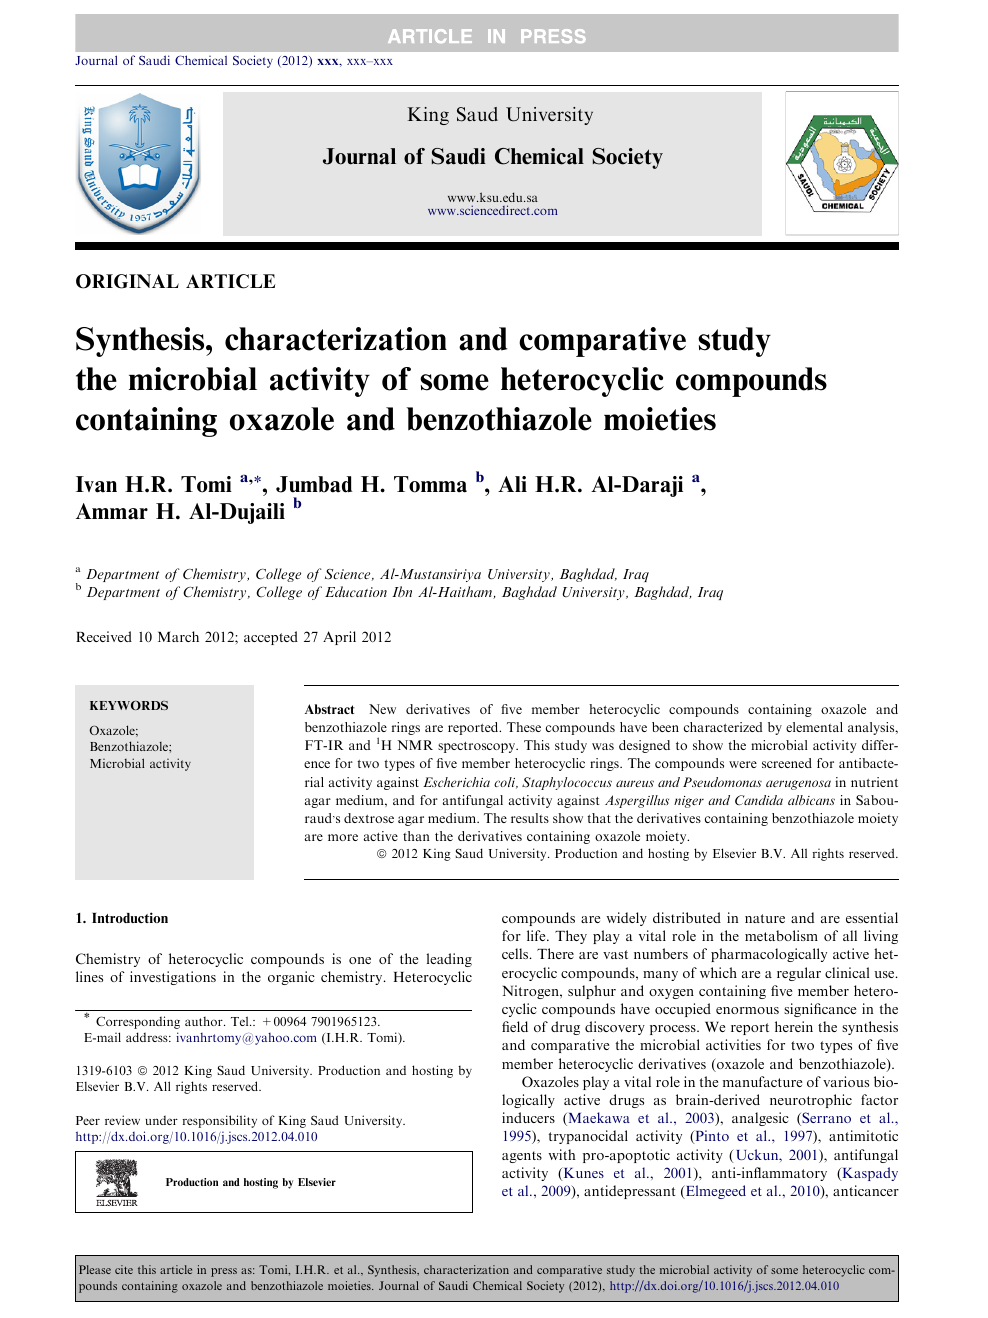 Synthesis Characterization And Comparative Study The Microbial Activity Of Some Heterocyclic Compounds Containing Oxazole And Benzothiazole Moieties Topic Of Research Paper In Chemical Sciences Download Scholarly Article Pdf And Read For